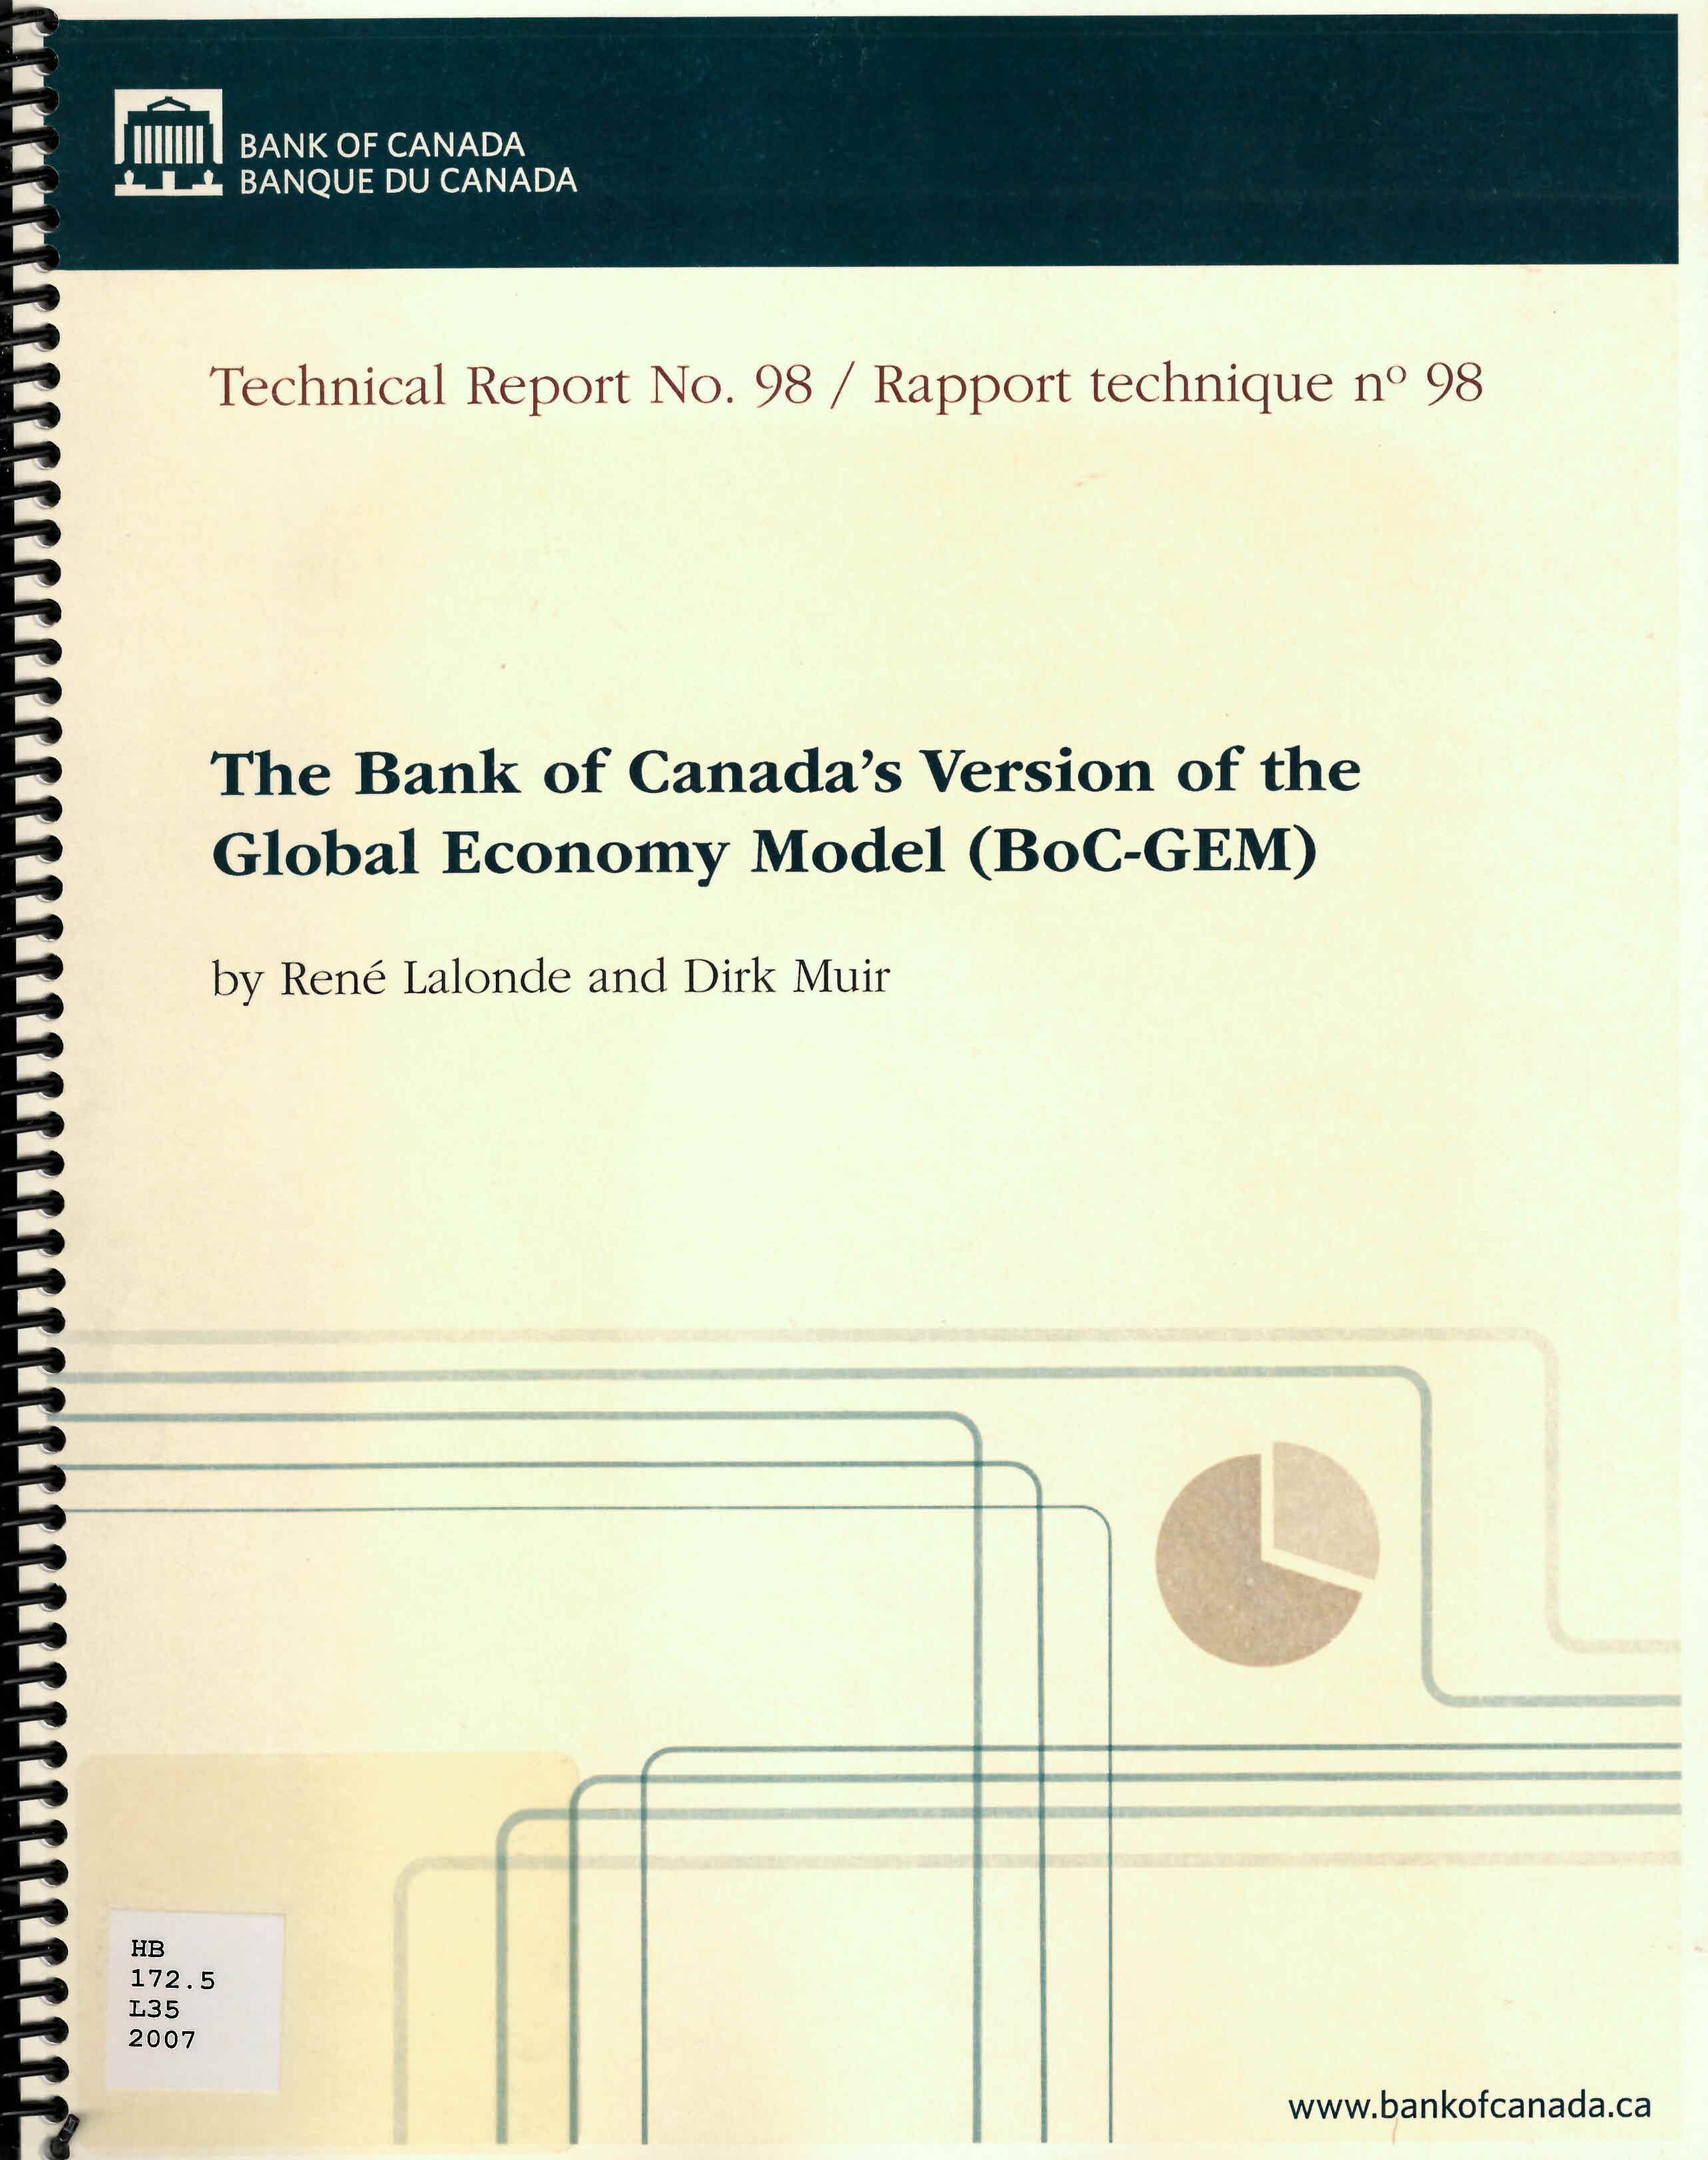 The Bank of Canada's version of the global economy model (BoC-GEM)